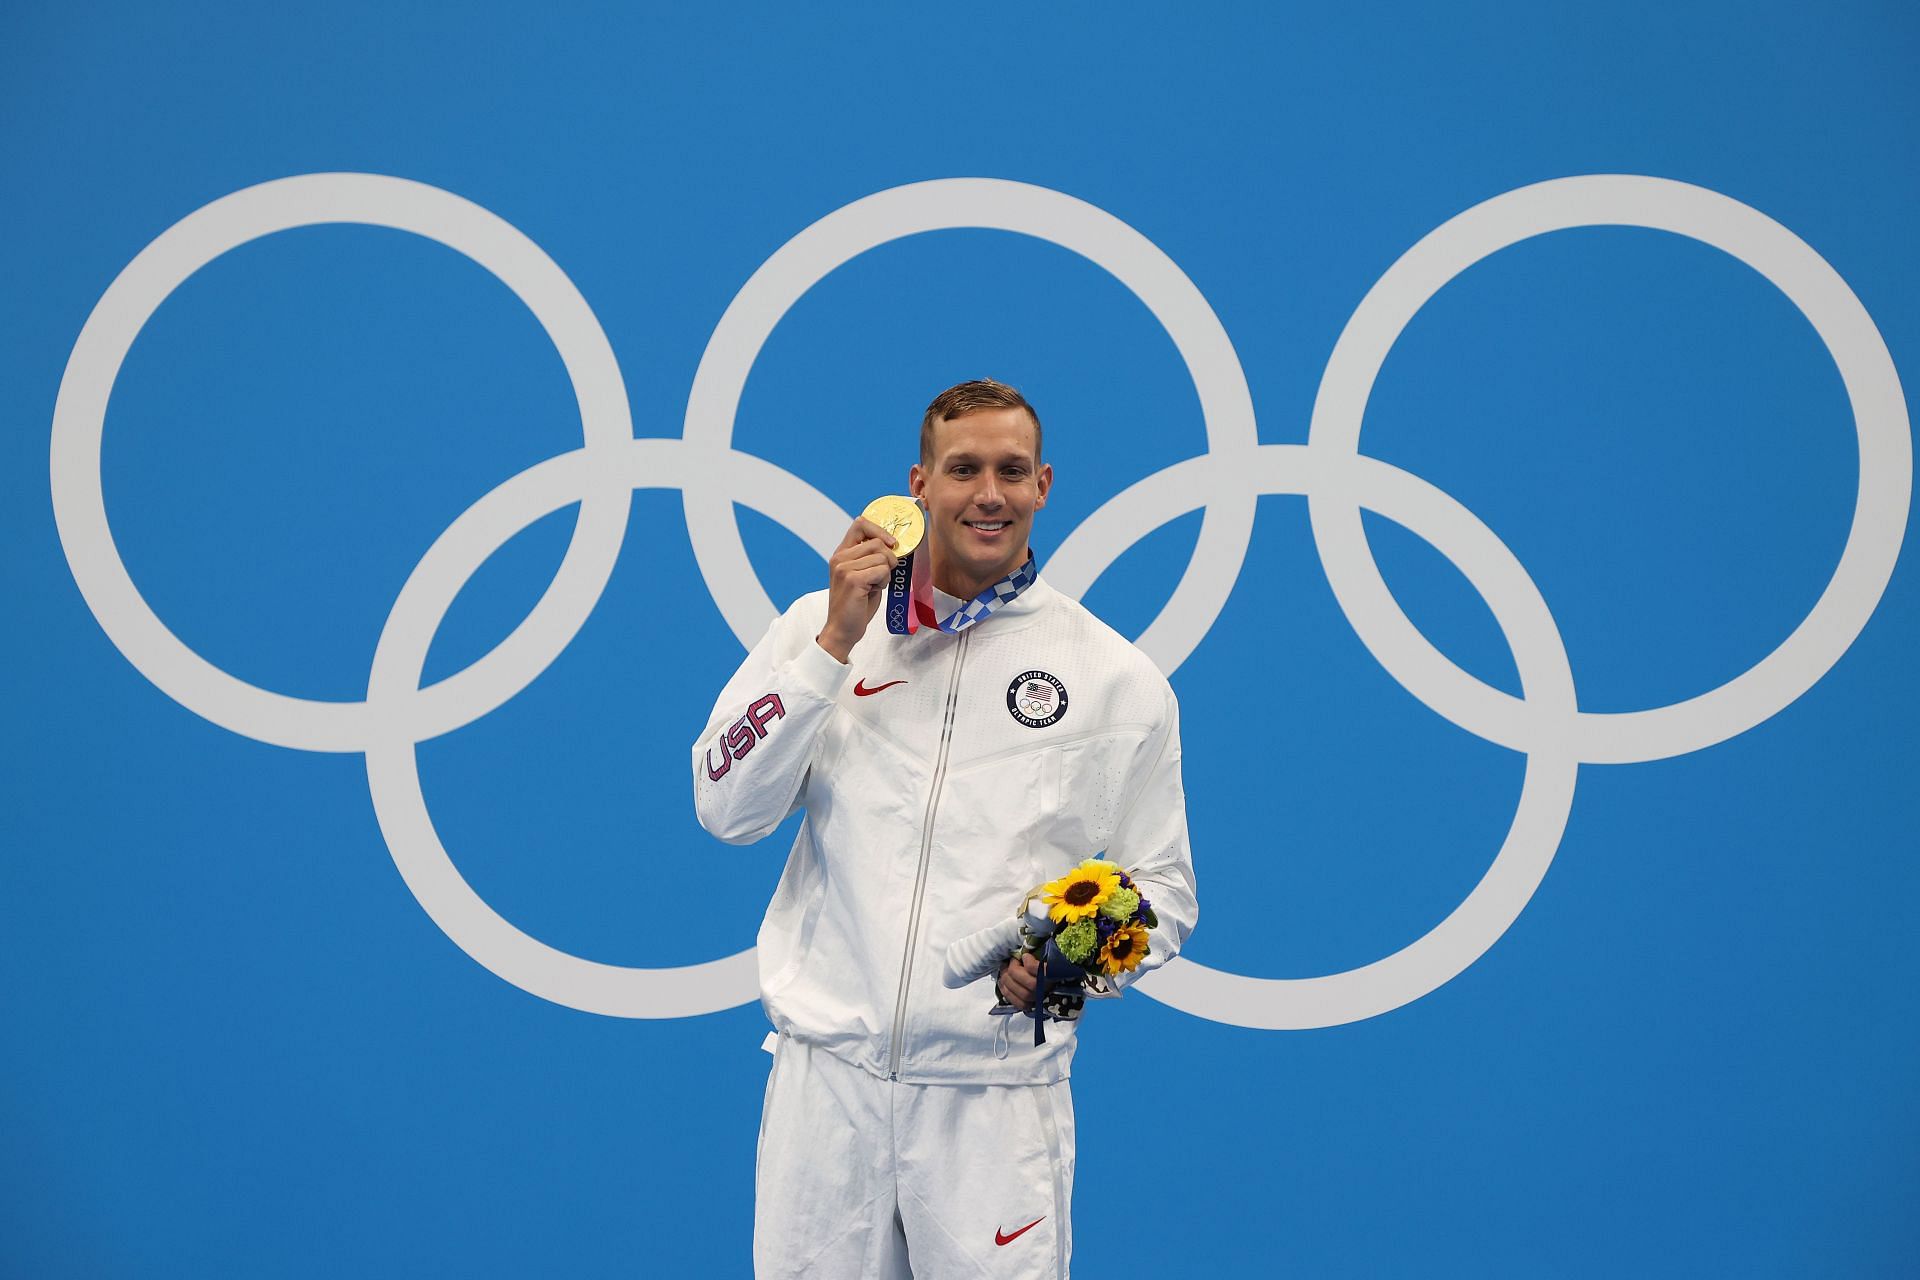 Caeleb Dressel at the Tokyo Olympics (Image courtesy: Getty)